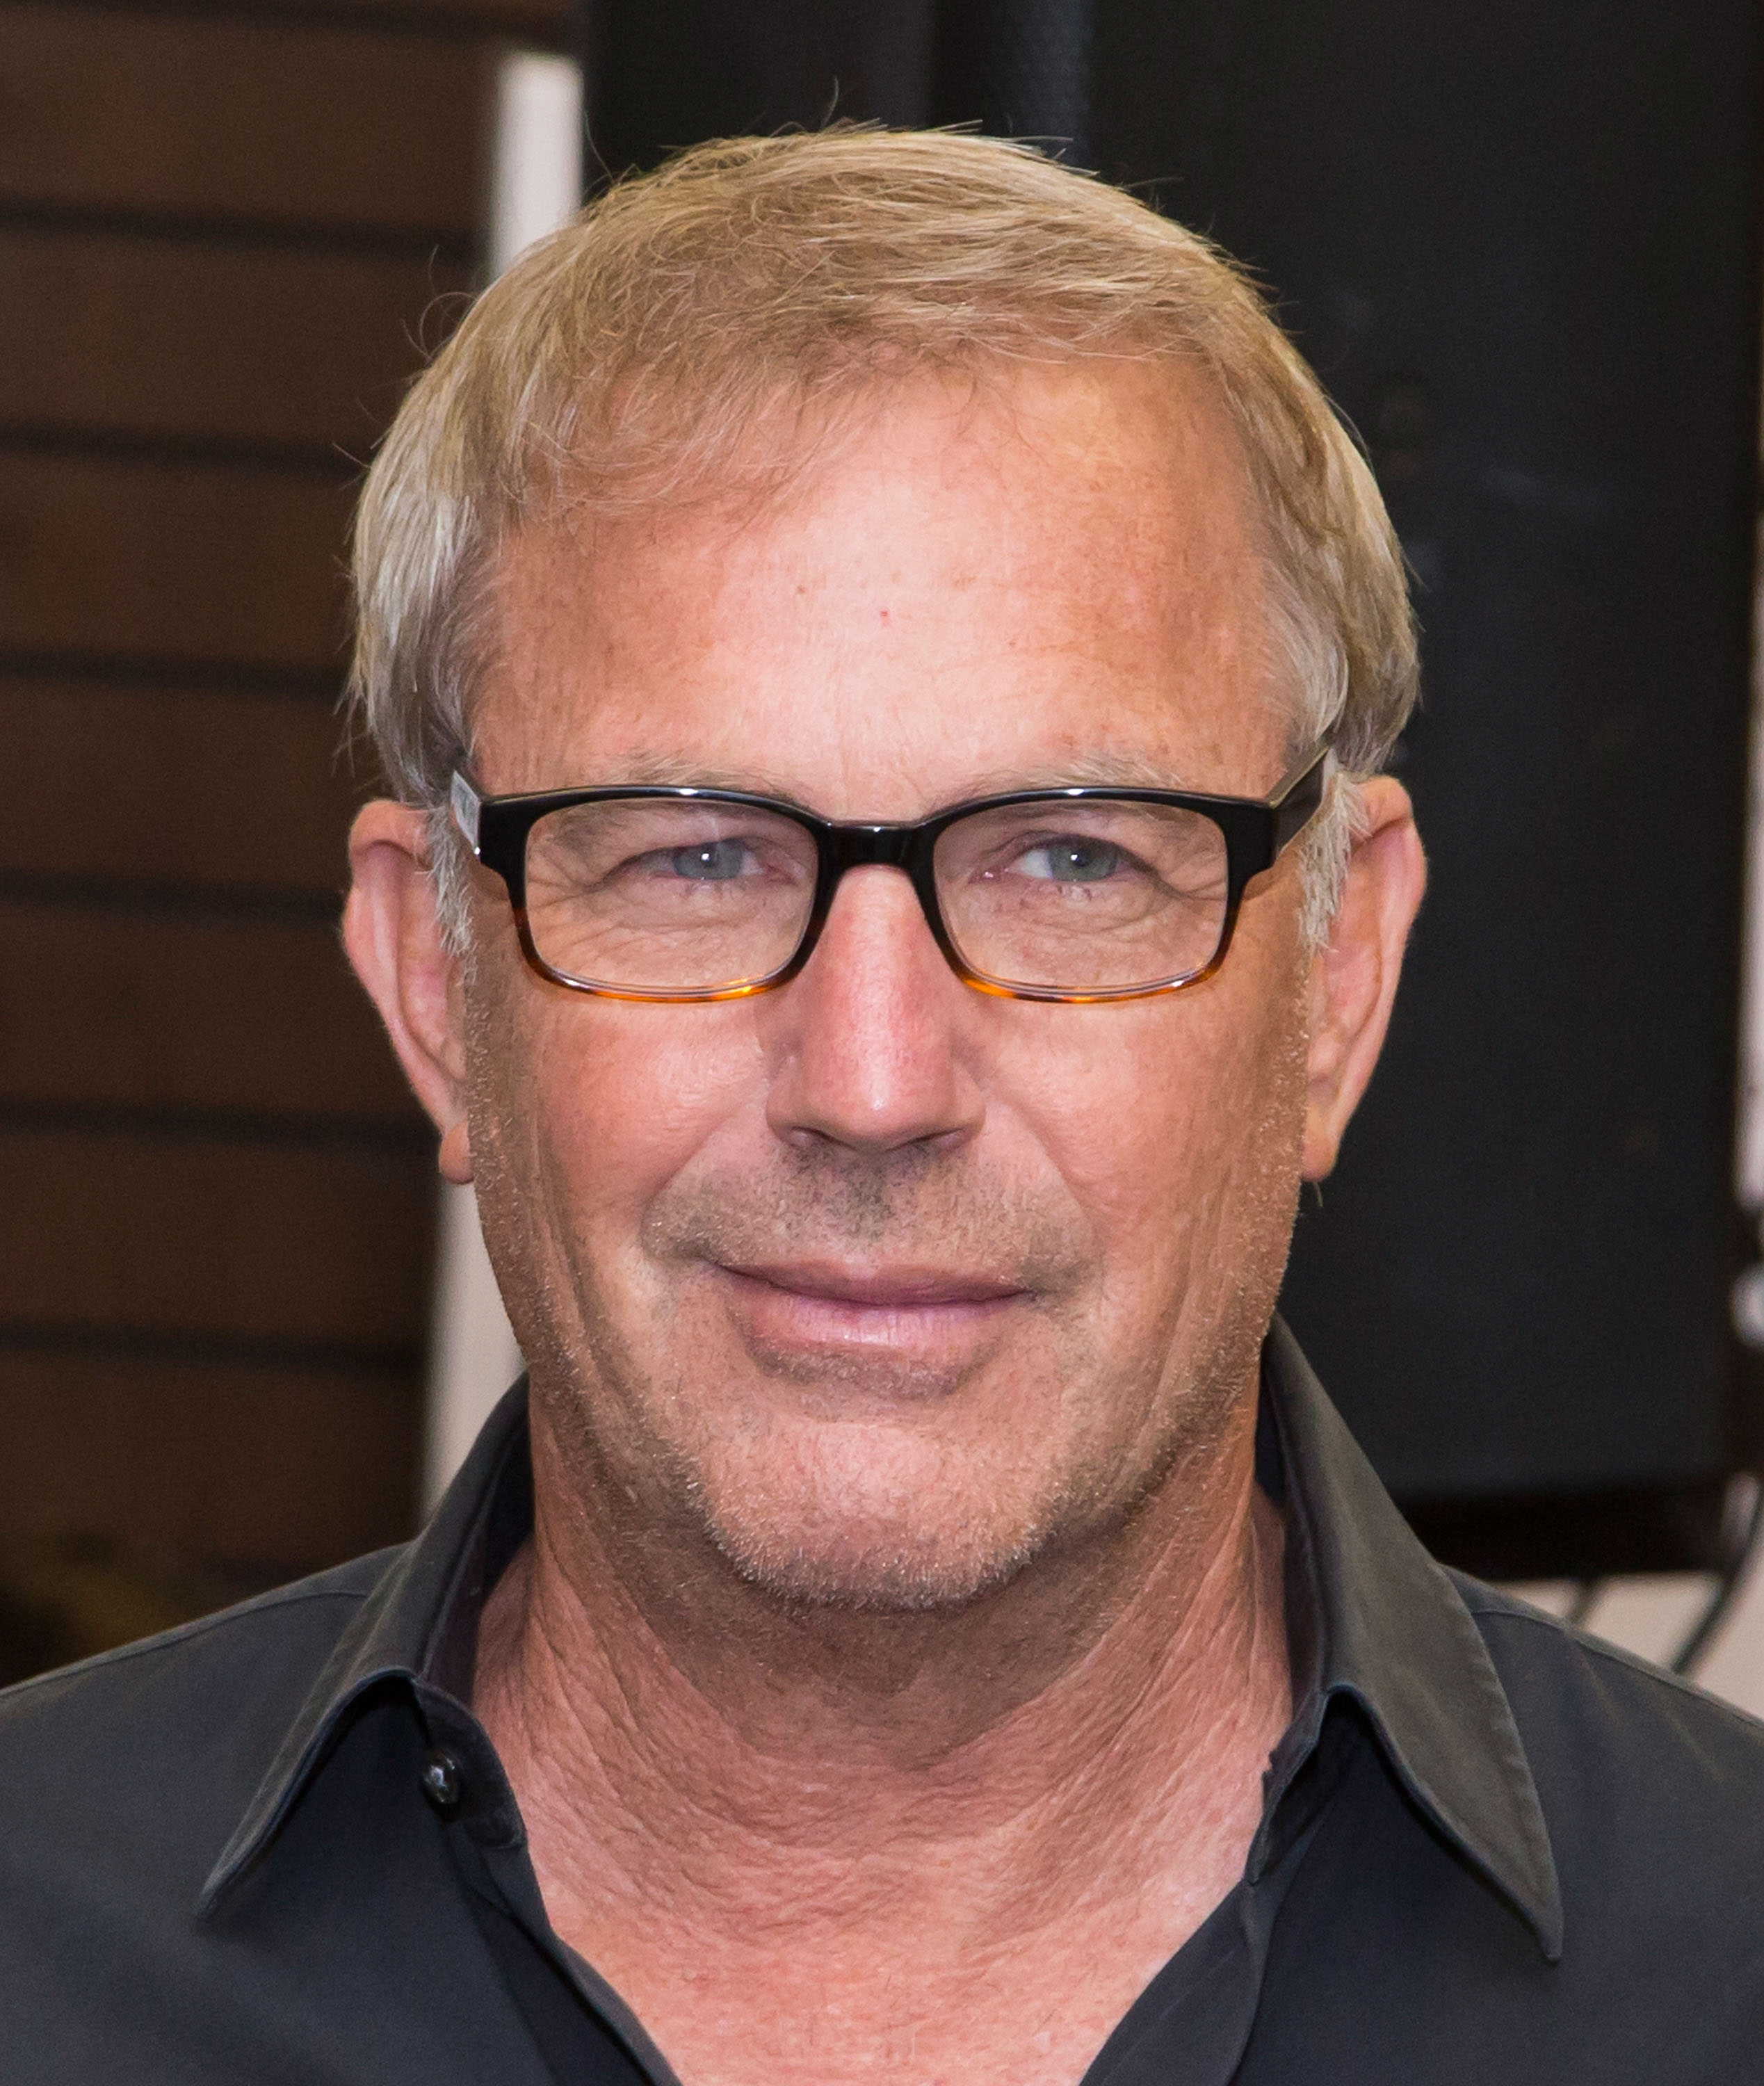 Kevin Costner at his book signing for "The Explorers Guild: Volume One: A Passage To Shambhala" in Los Angeles, 2015 | Source: Getty Images